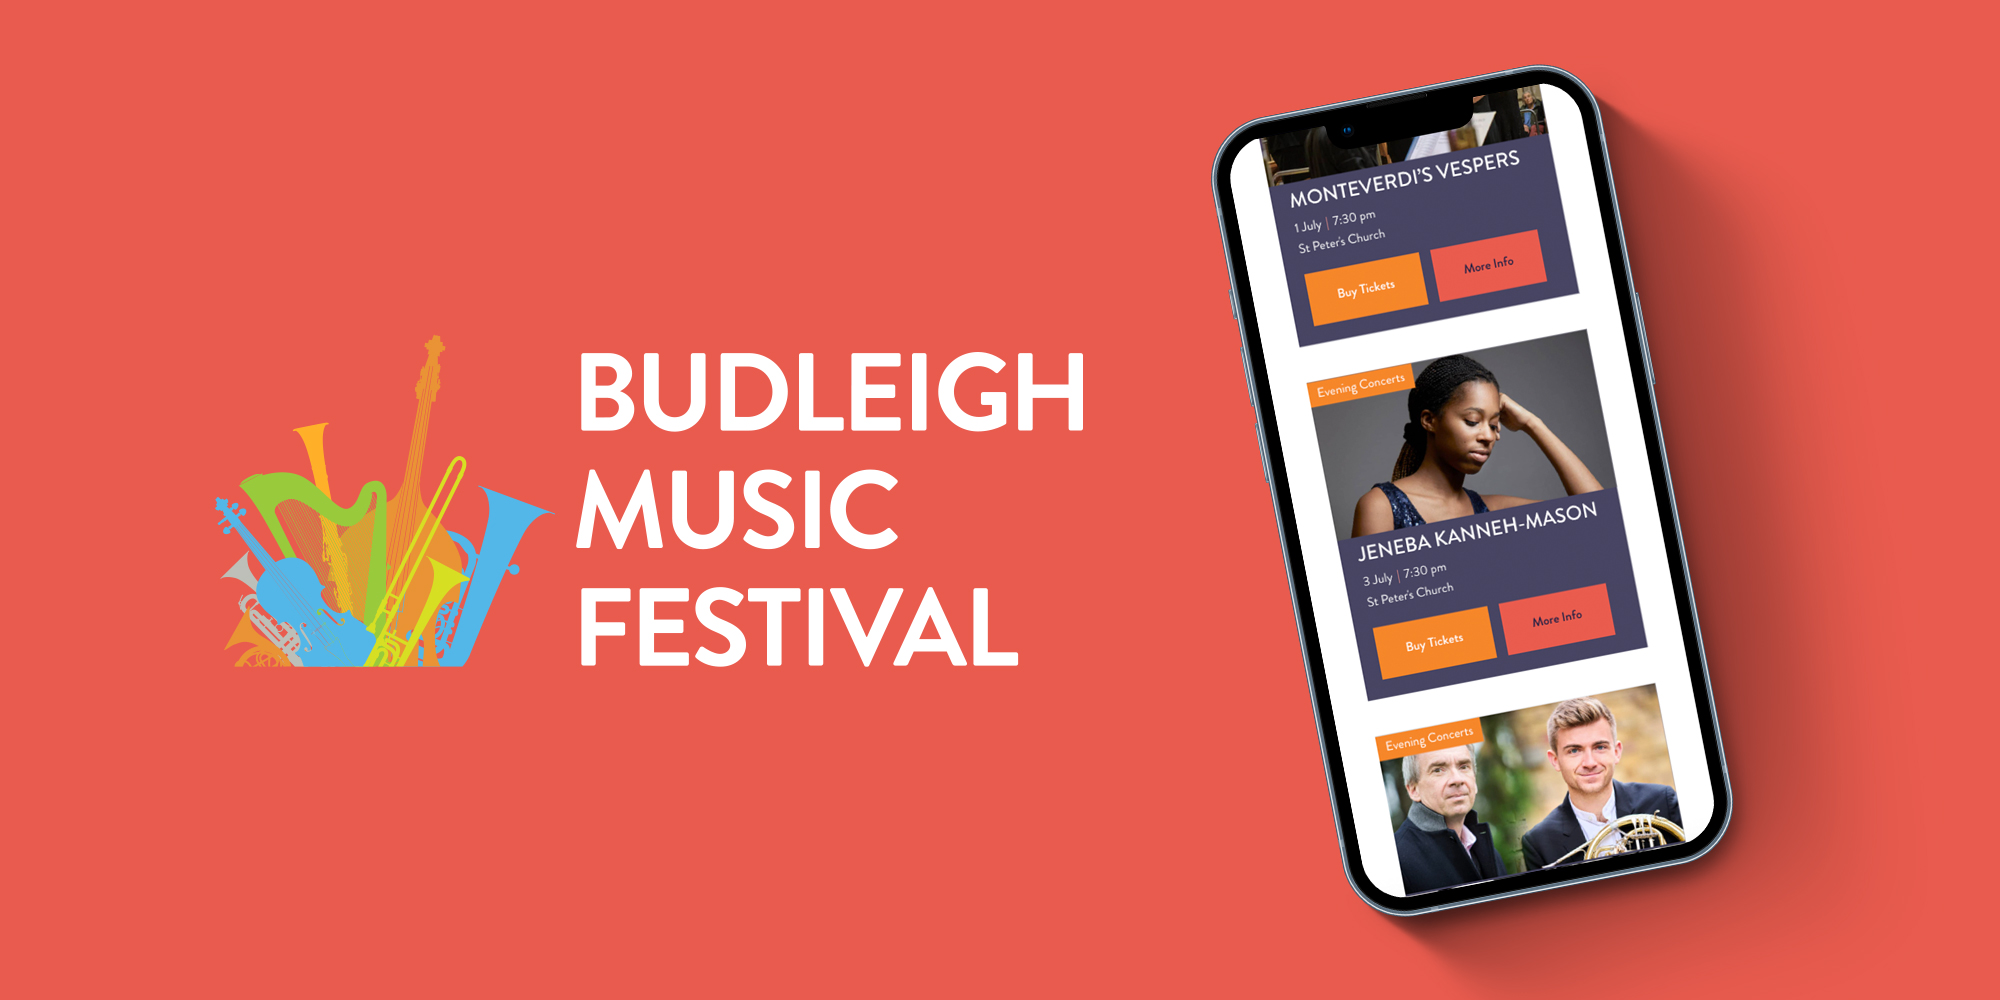 Budleigh Music Festival logo and events page shown on a phone screen